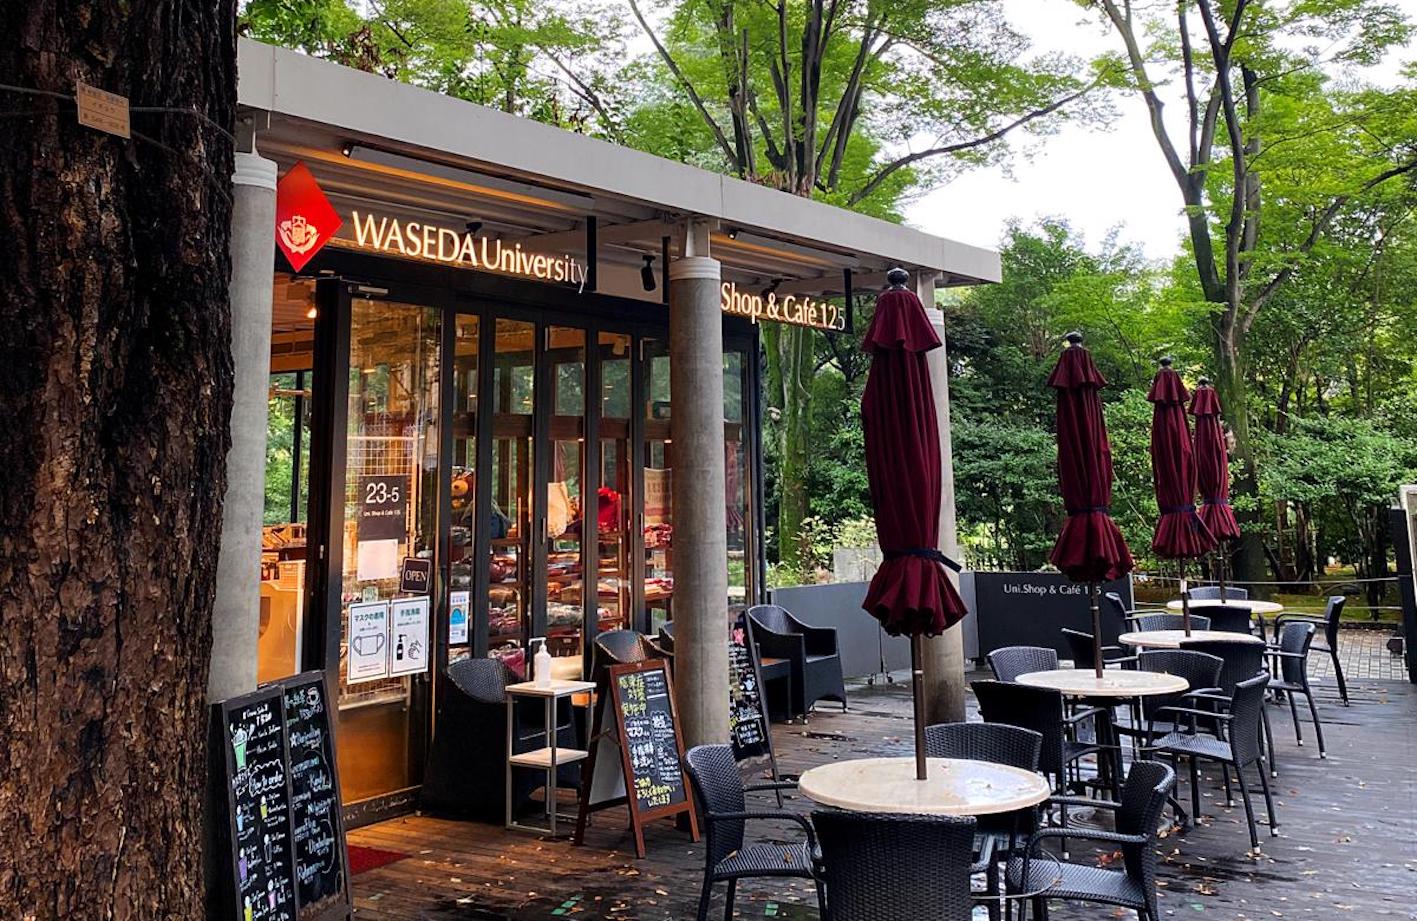 Photo of the Waseda University Uni Shop & Cafe 125. Outdoor seating in the front, trees in the background.